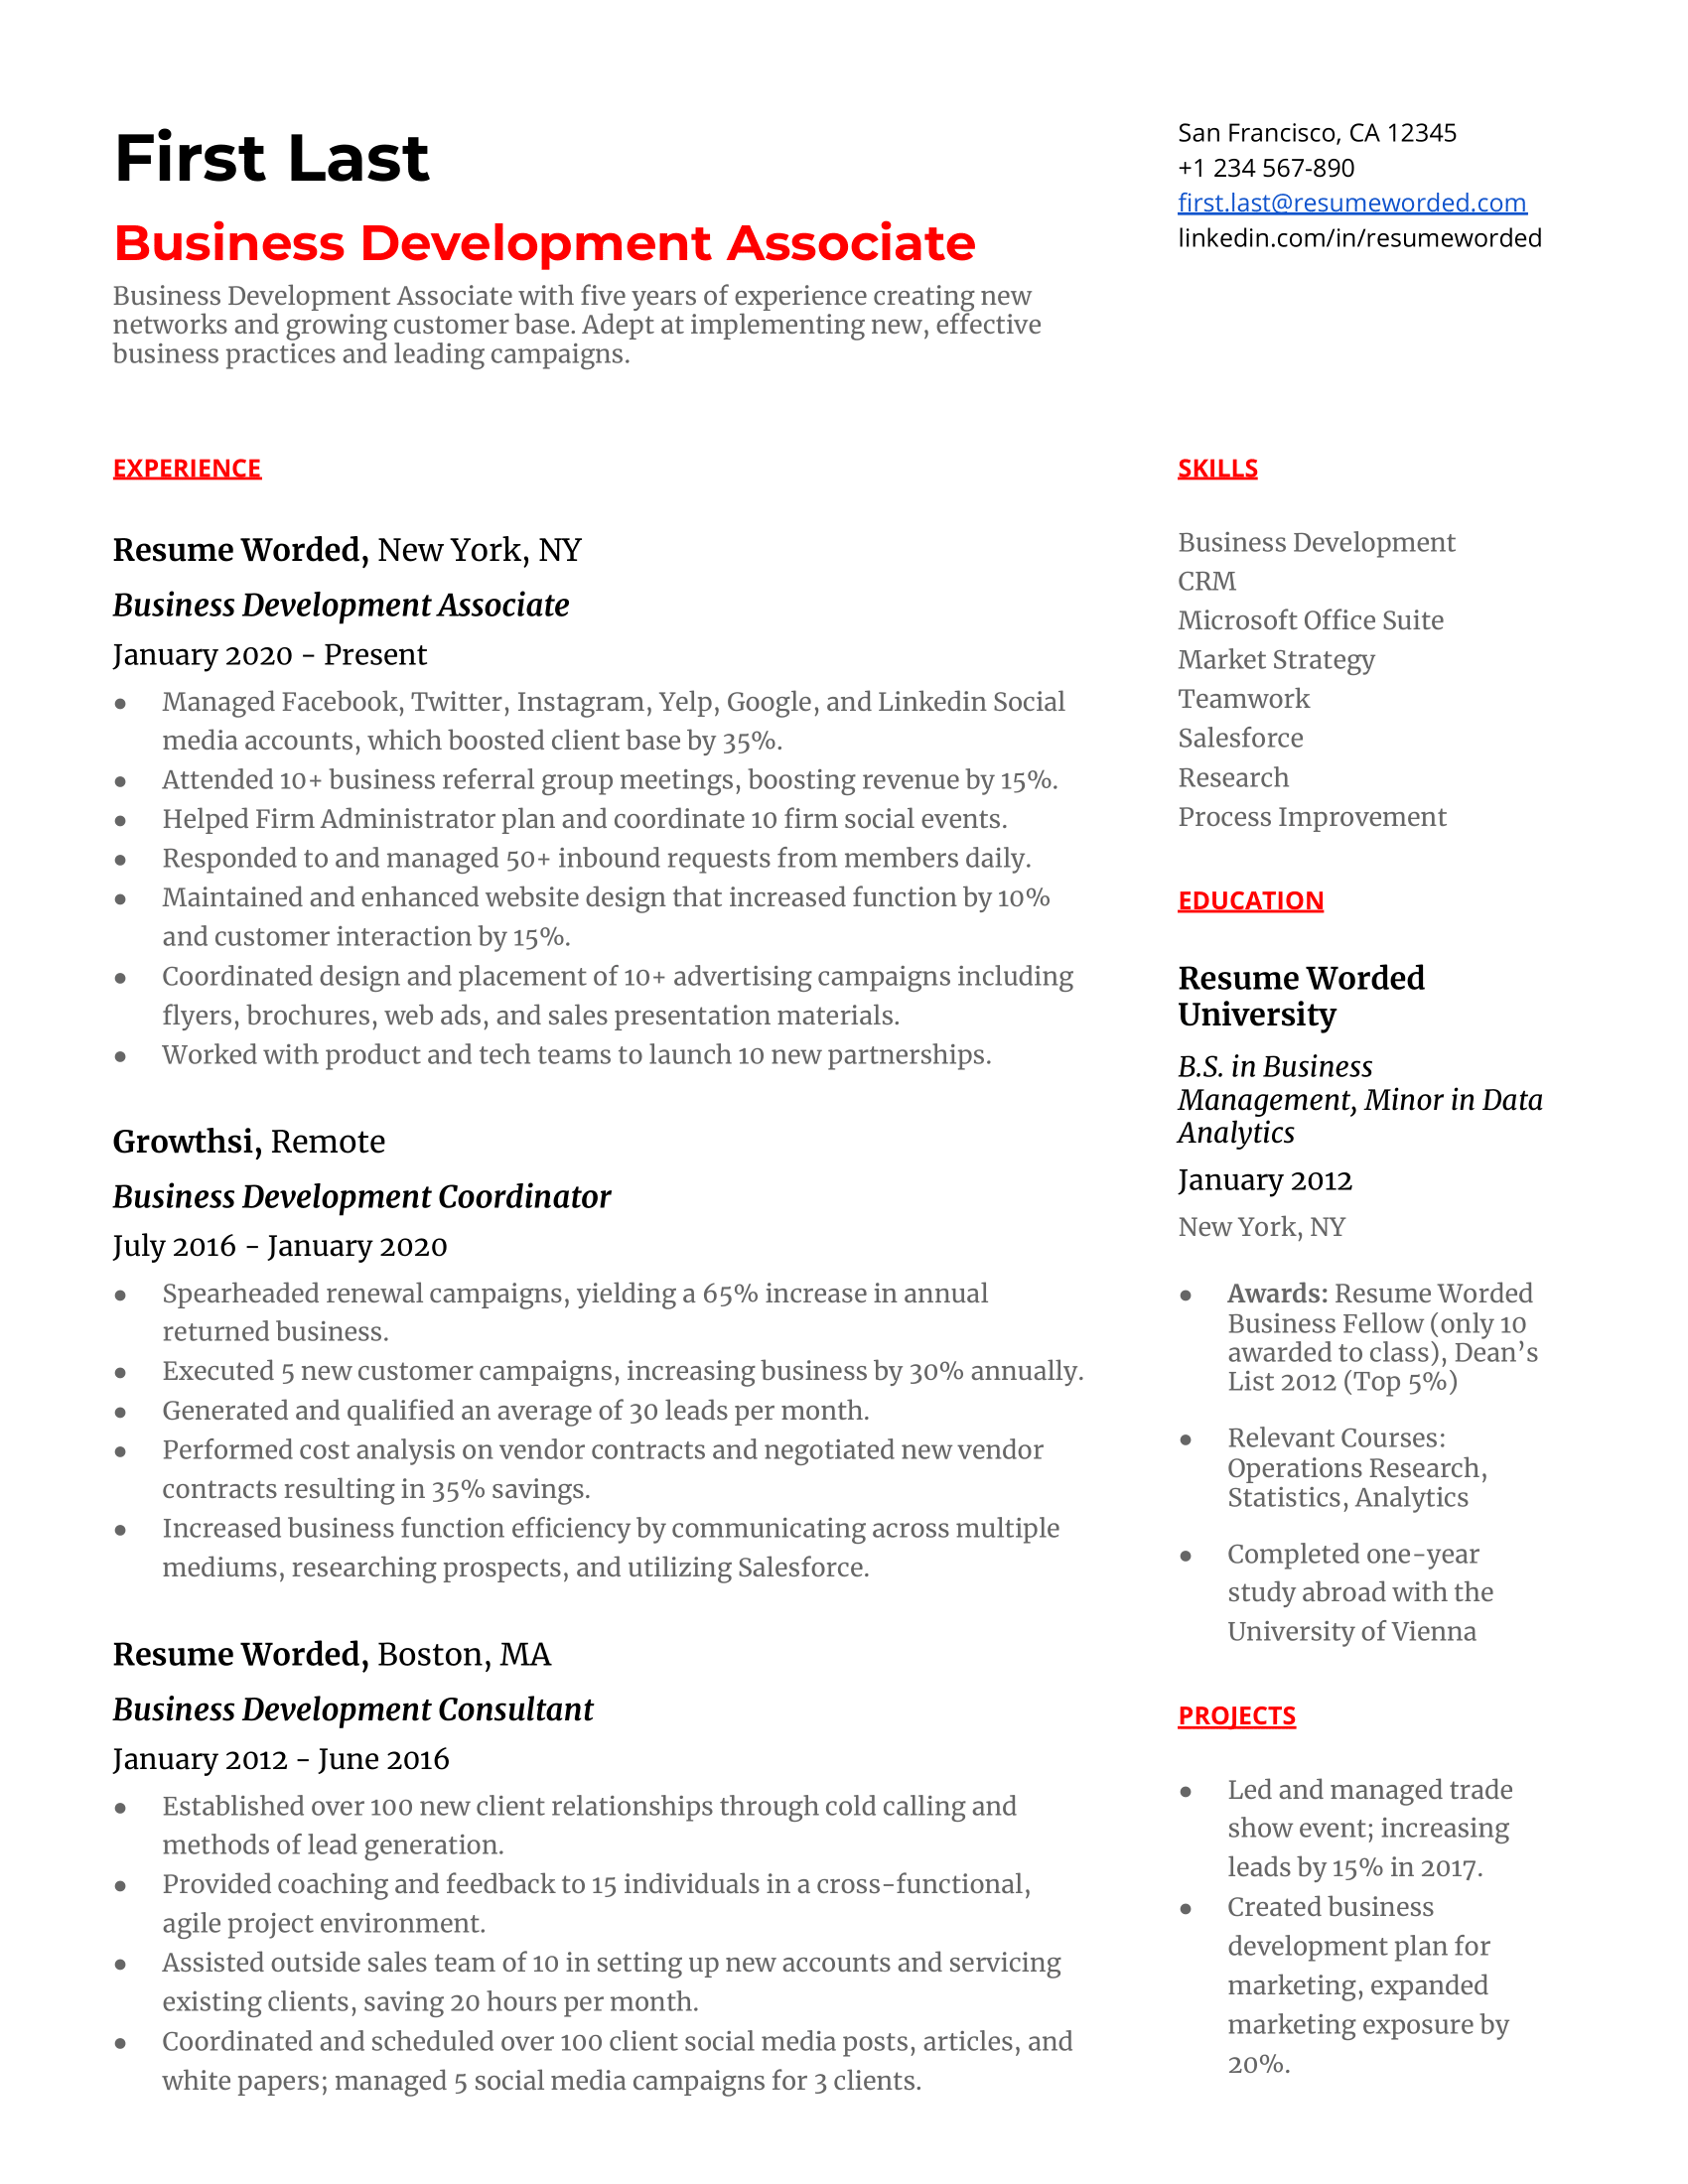 A resume for a business development associate with a degree in business management and experience as a business development coordinator.